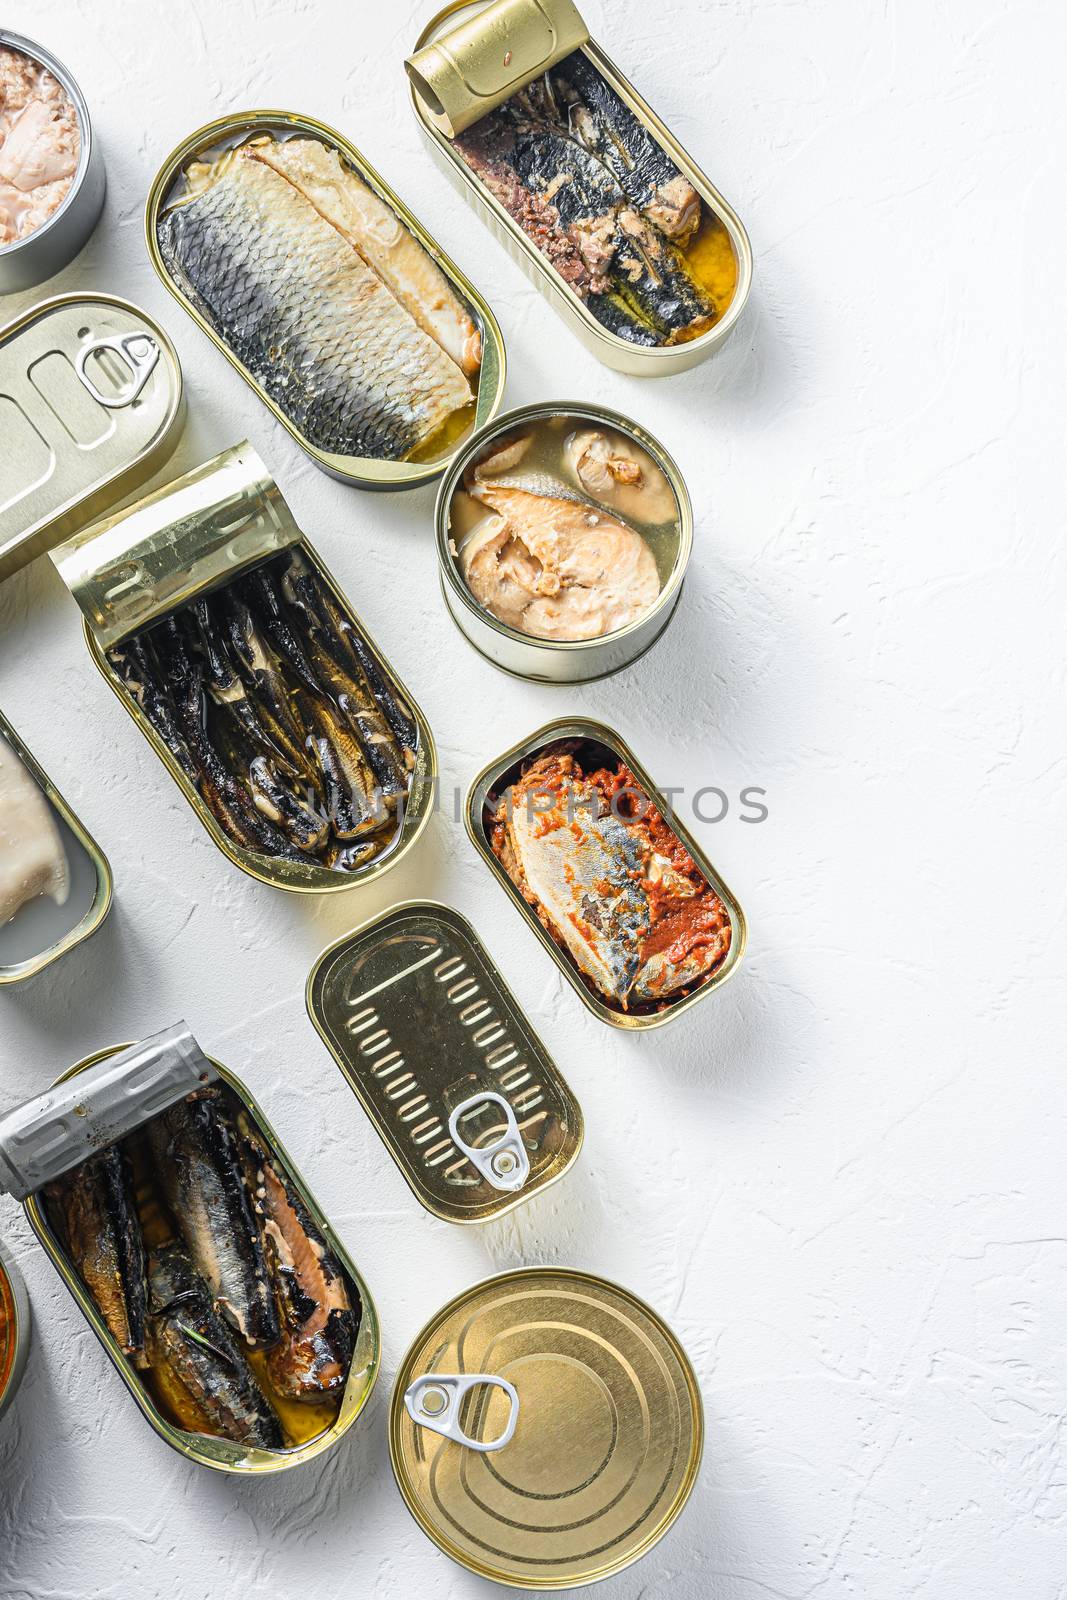 opened cans with different types of fish and seafood, opened and closed cans with Saury, mackerel, sprats, sardines, pilchard, squid, tuna, over white stone surface top view vertical space for text